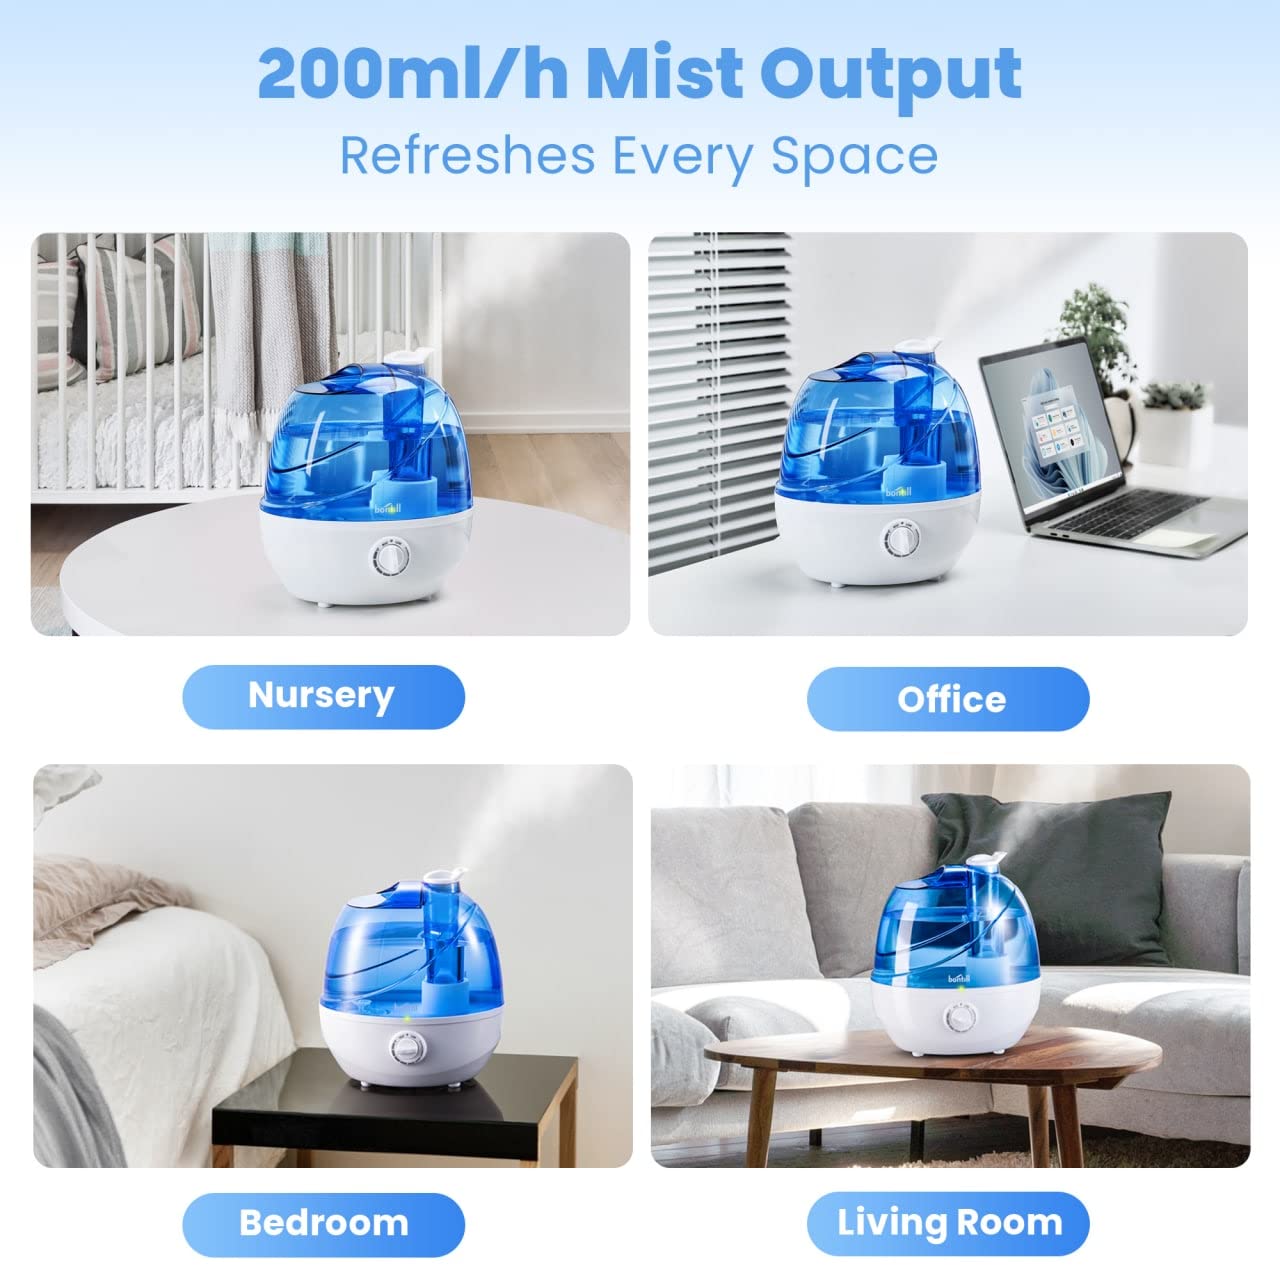 Cool Mist Humidifiers for Bedroom & Large Room (2.5l Water Tank) Quiet Ultrasonic Air Humidifier For Babies Nursery, Office, Indoor Plants & Whole House -Adjustable 360 Rotation Nozzle, Auto-Shut Off